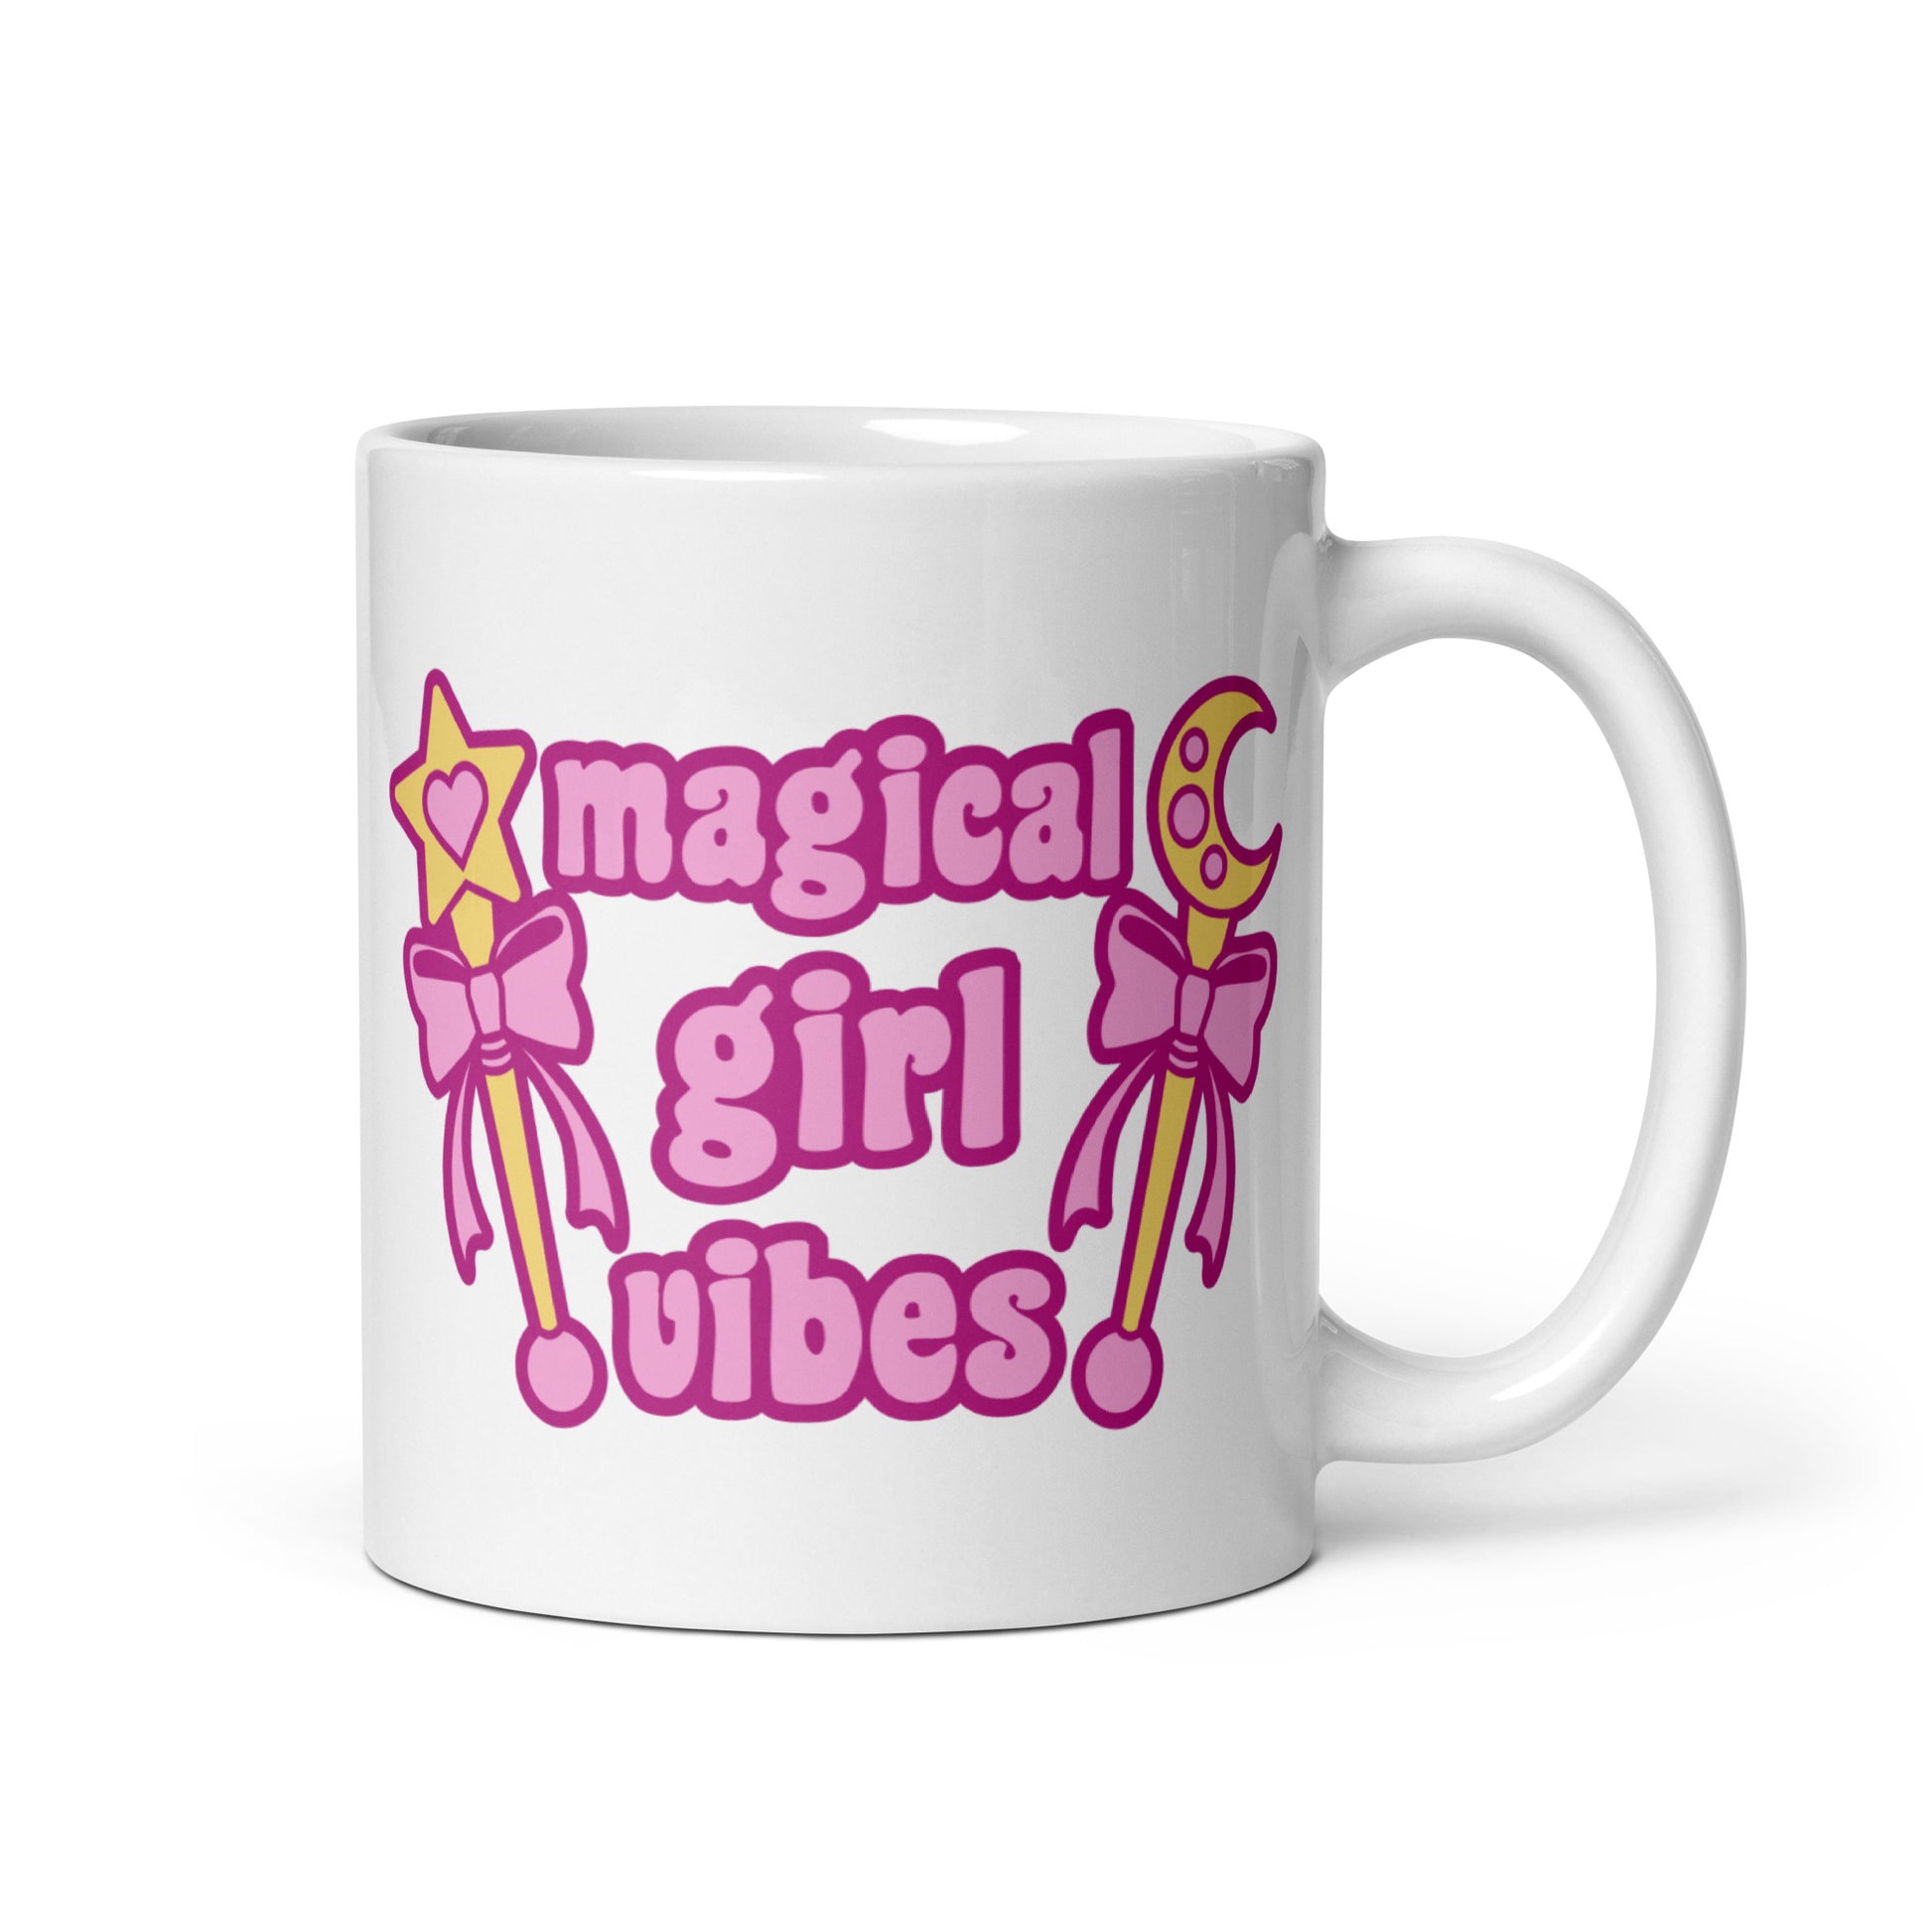 An 11 oz white ceramic mug with the handle to the right featuring two gold wands with pink bows and pink text reading "Magical girl vibes"